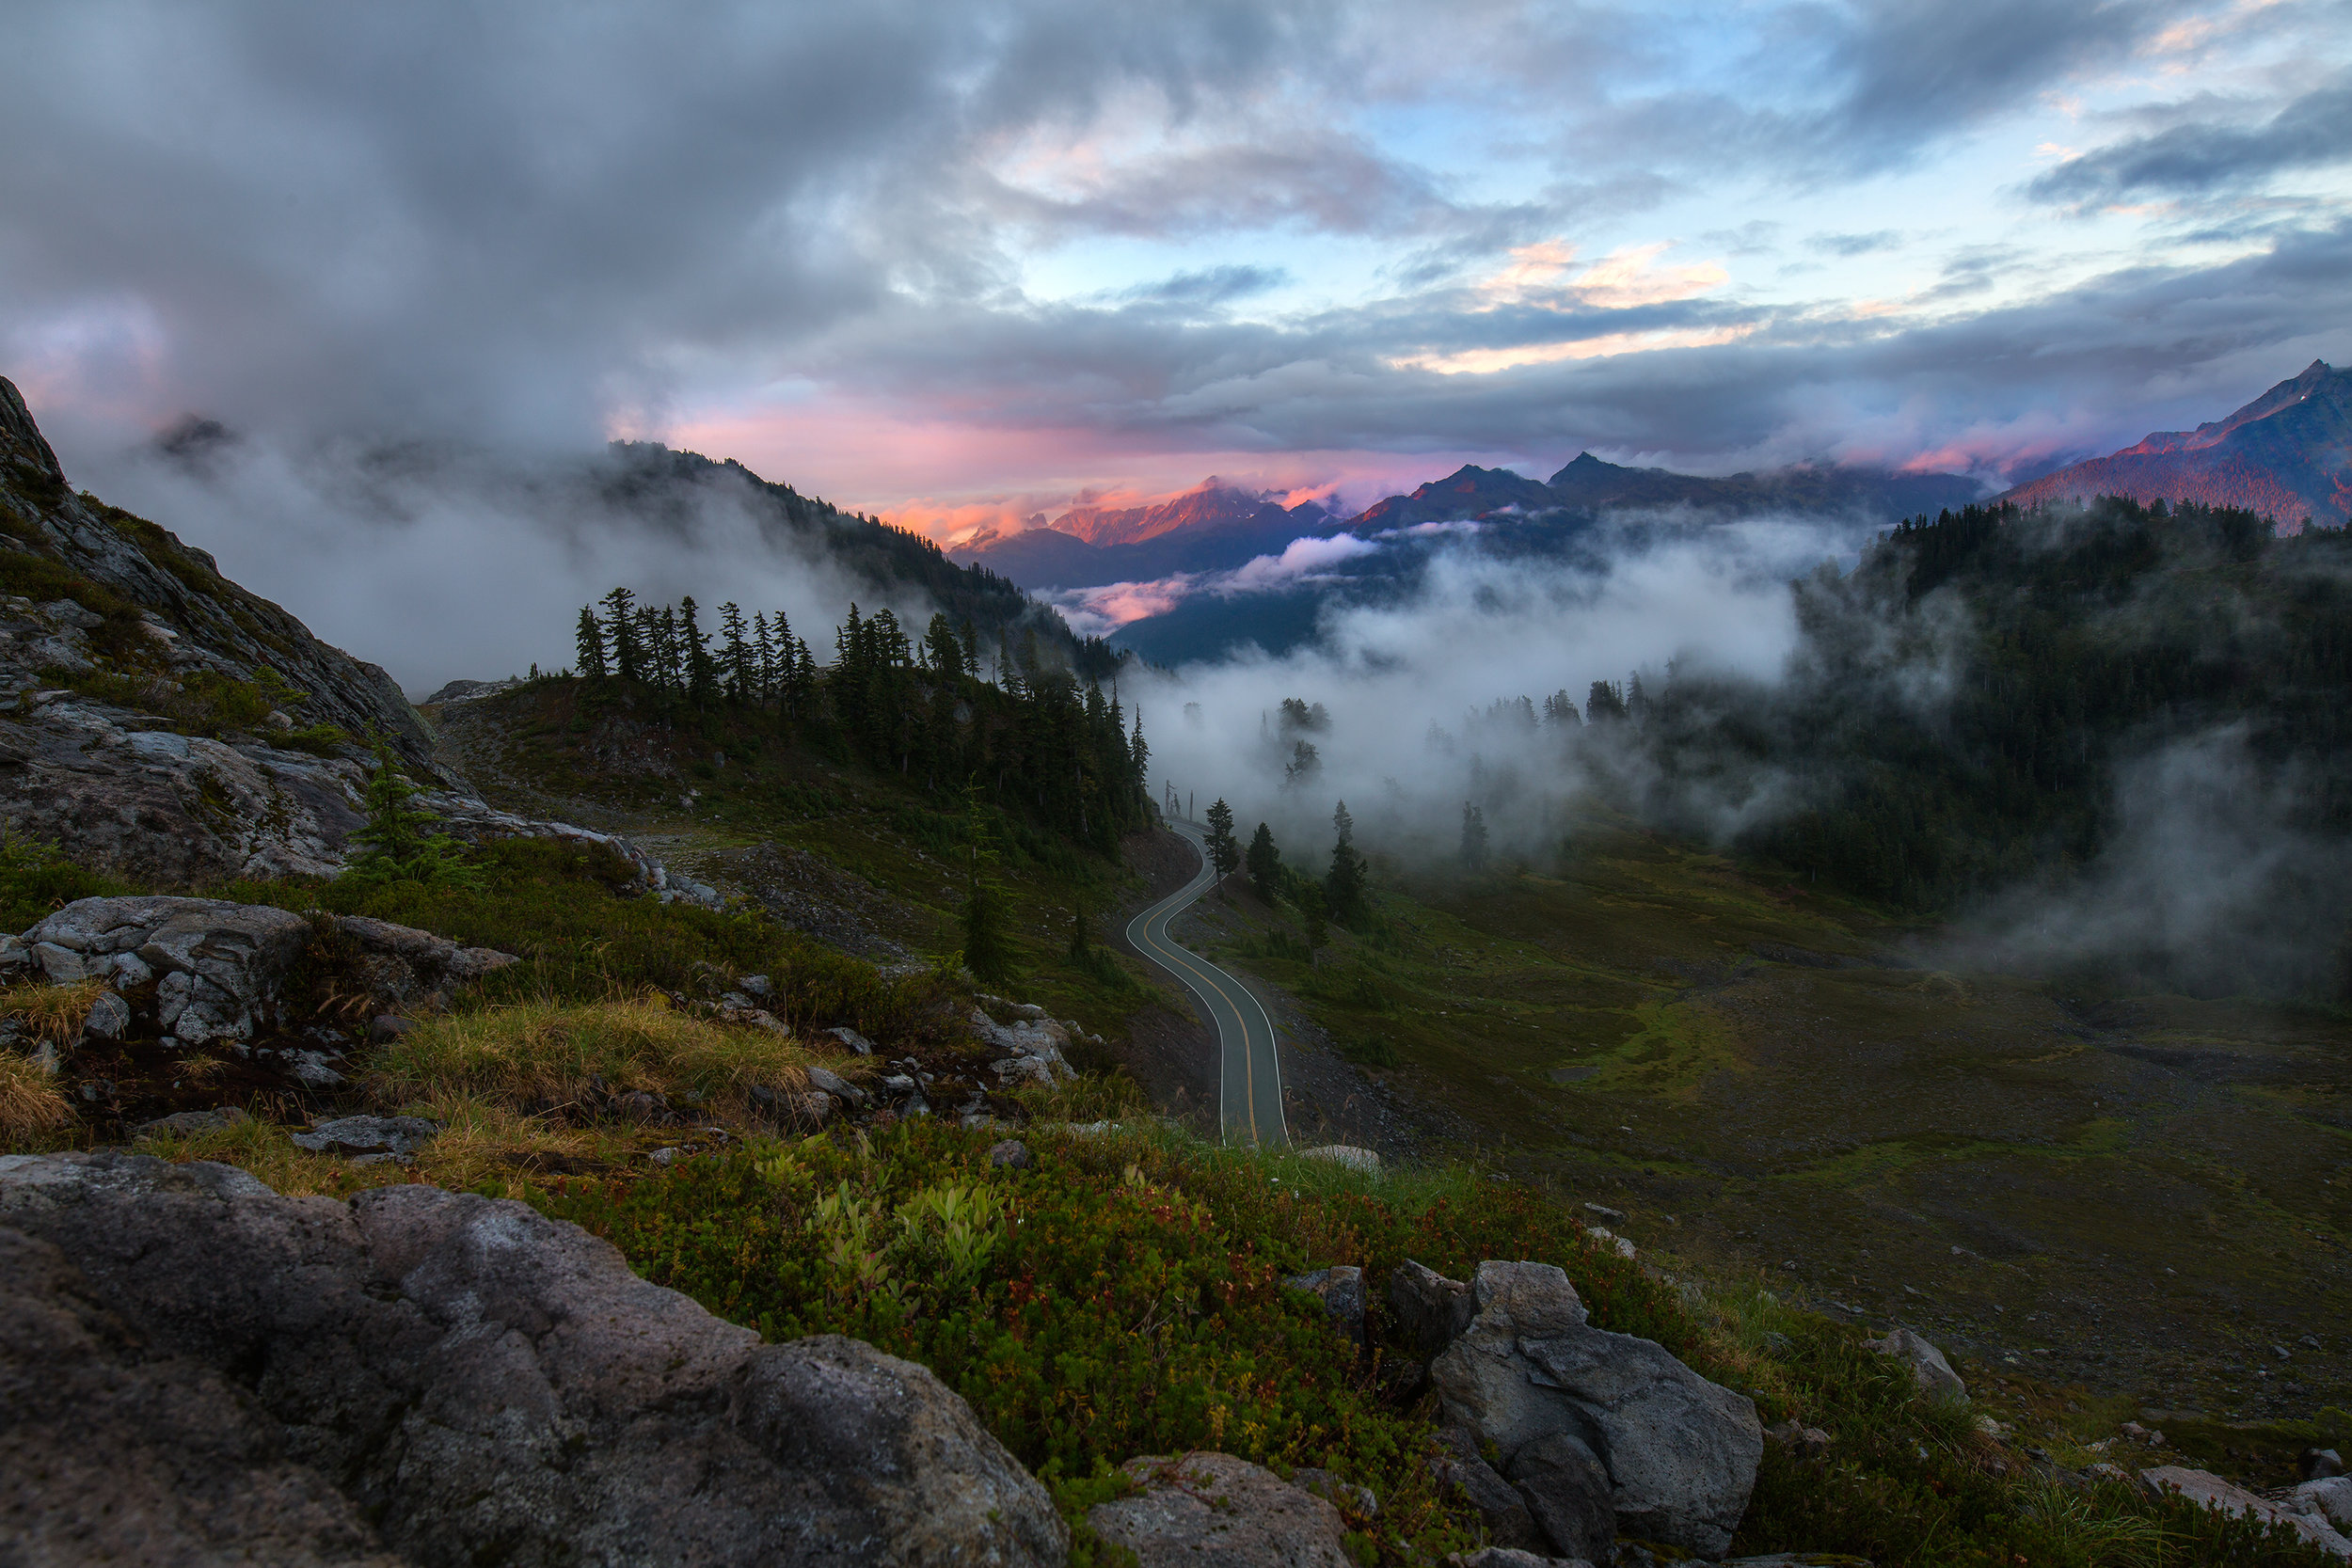  Looking north east from the Artist Point area in Mount Baker-Snoqualmie National Forest. 